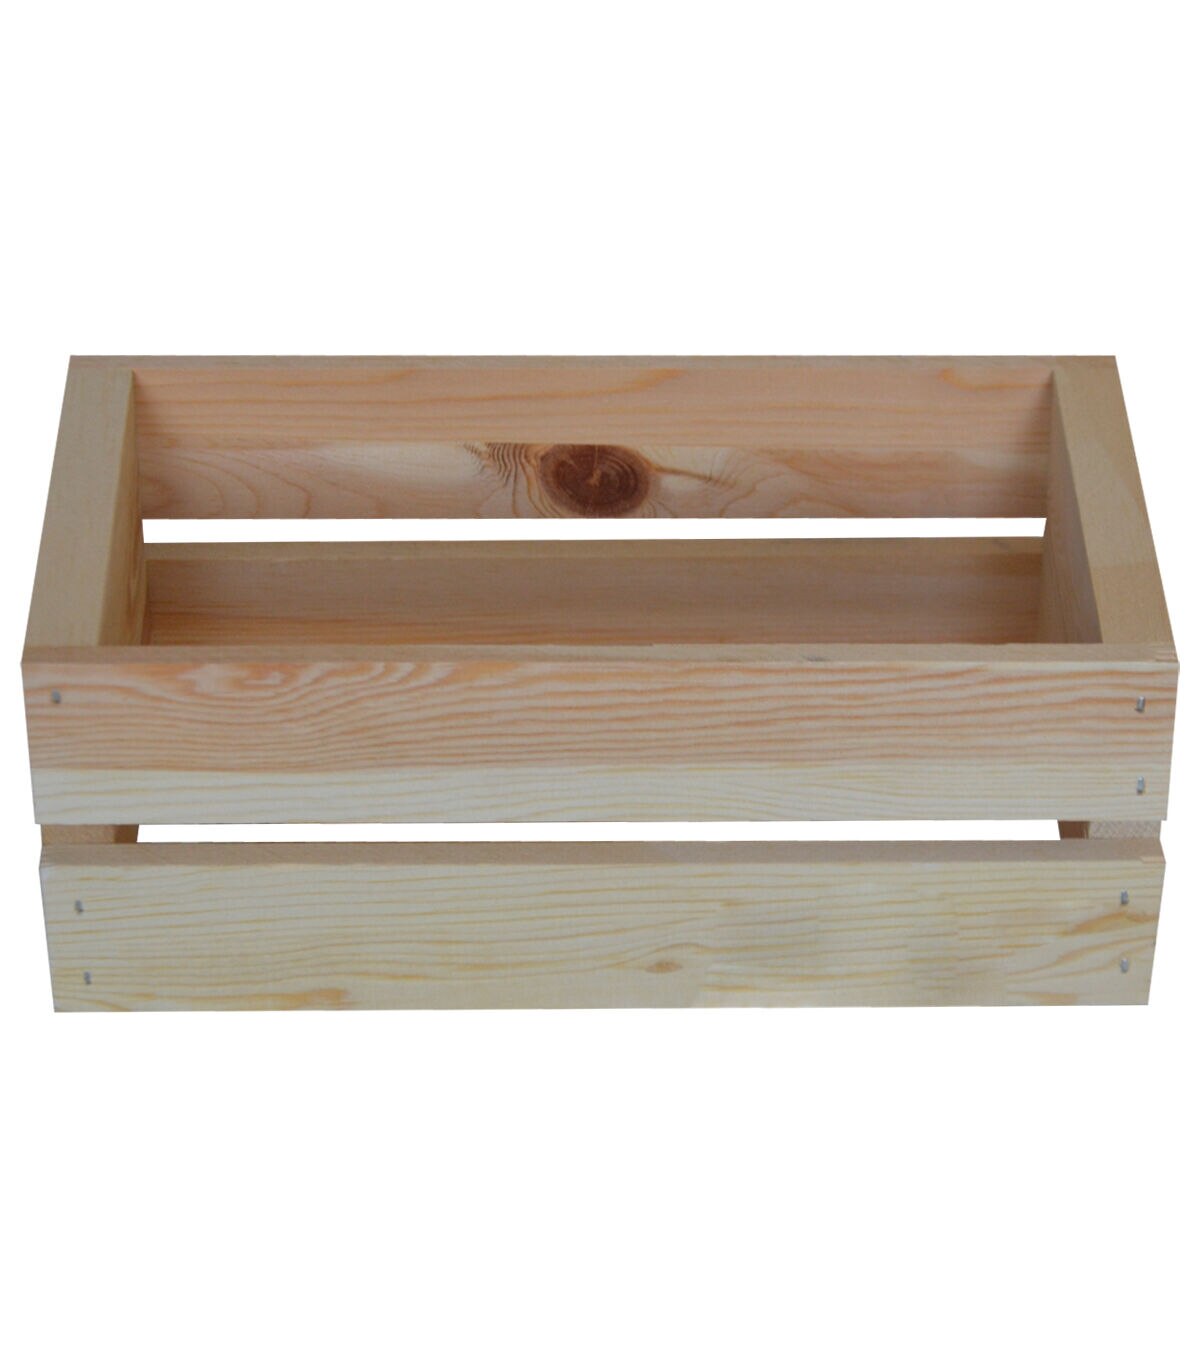 1/2/3x Wooden Plain CD Box Case Holder /Wood Unpainted Storage Boxes for Craft 